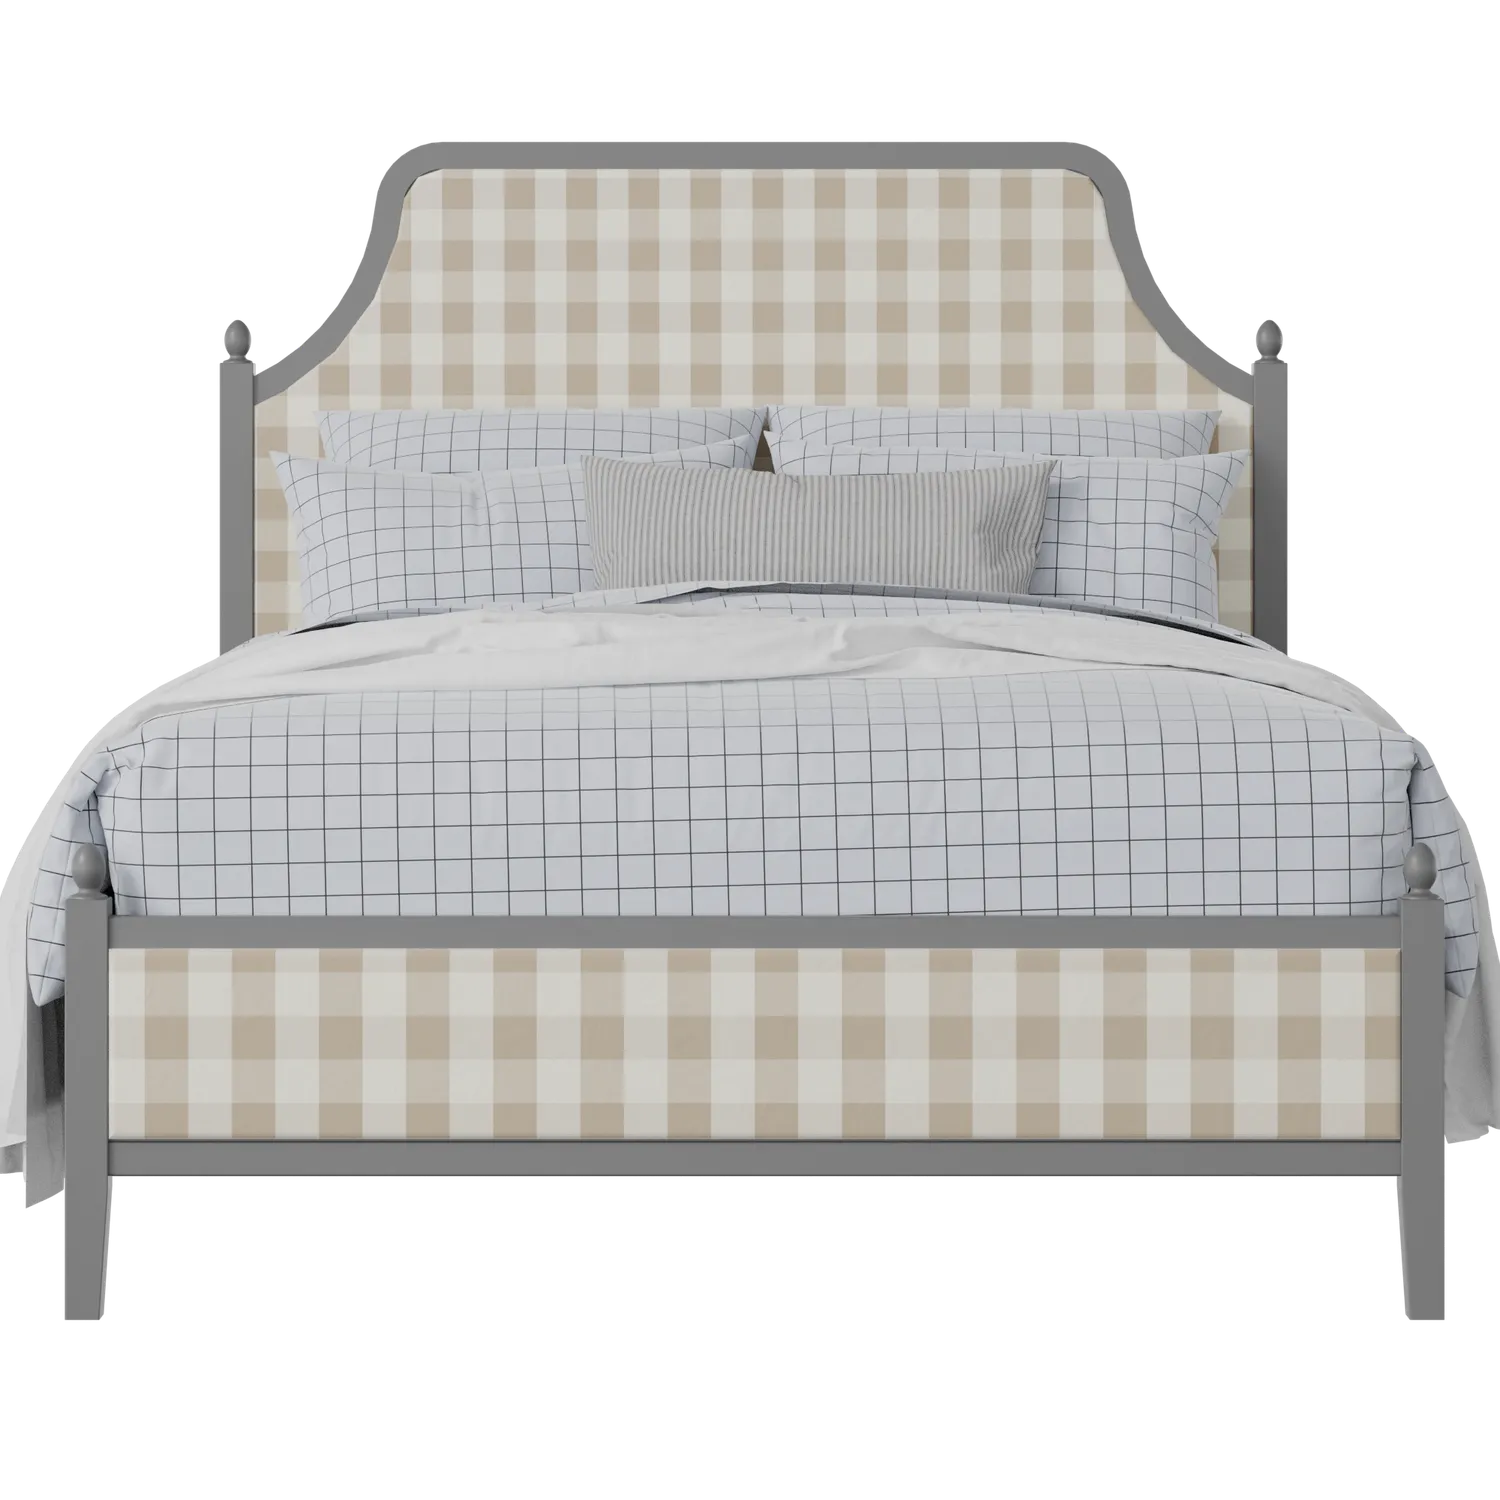 Ruskin Slim Upholstered wood upholstered upholstered bed in grey with Romo Kemble Putty fabric